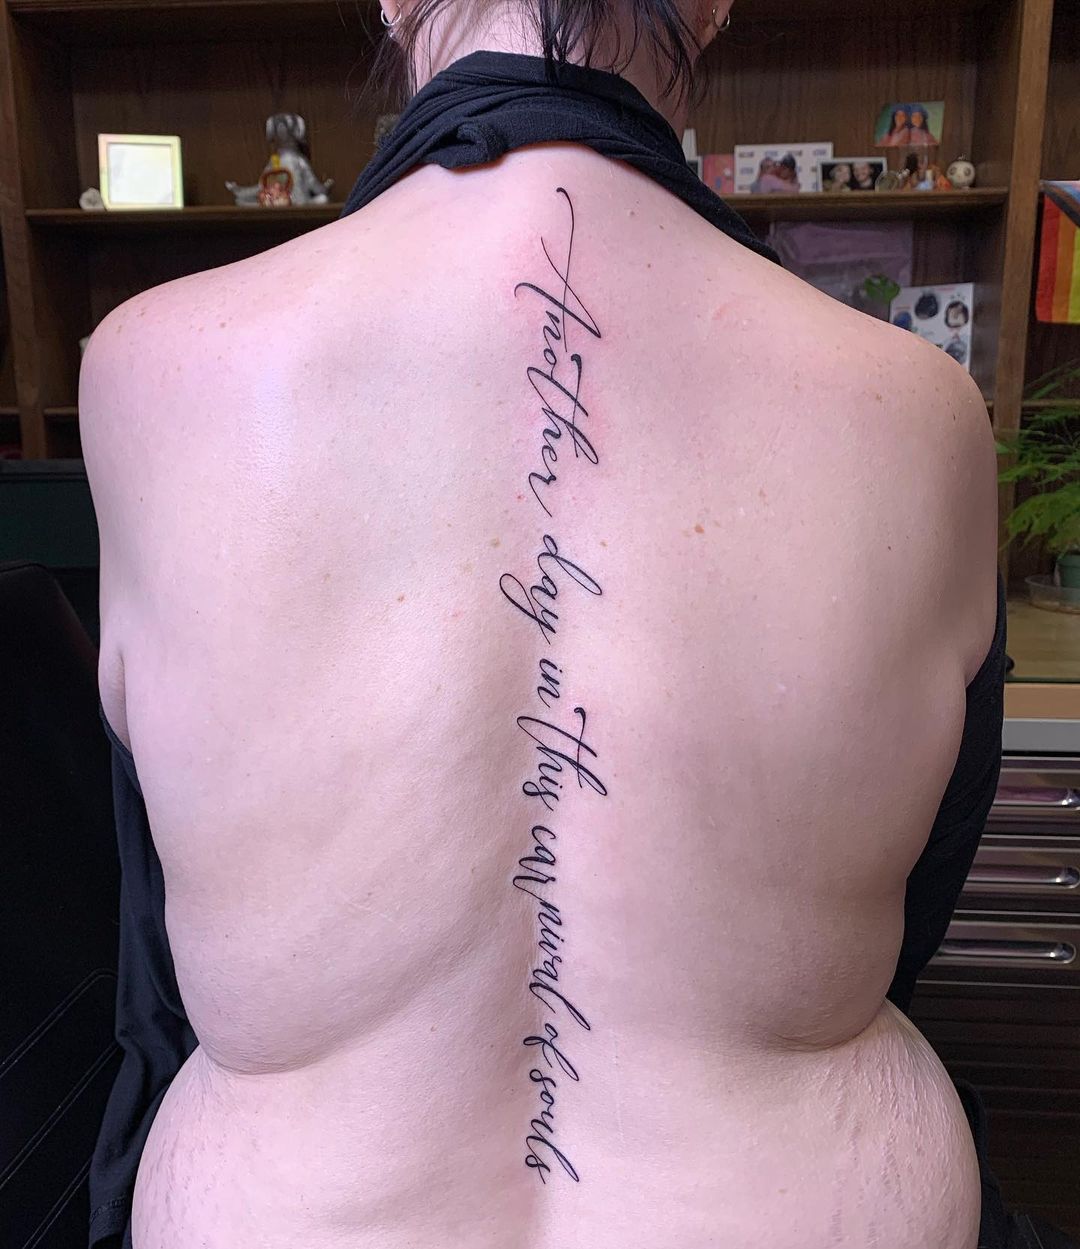 Script and quote tattoo placement - The Black Hat Tattoo Dublin